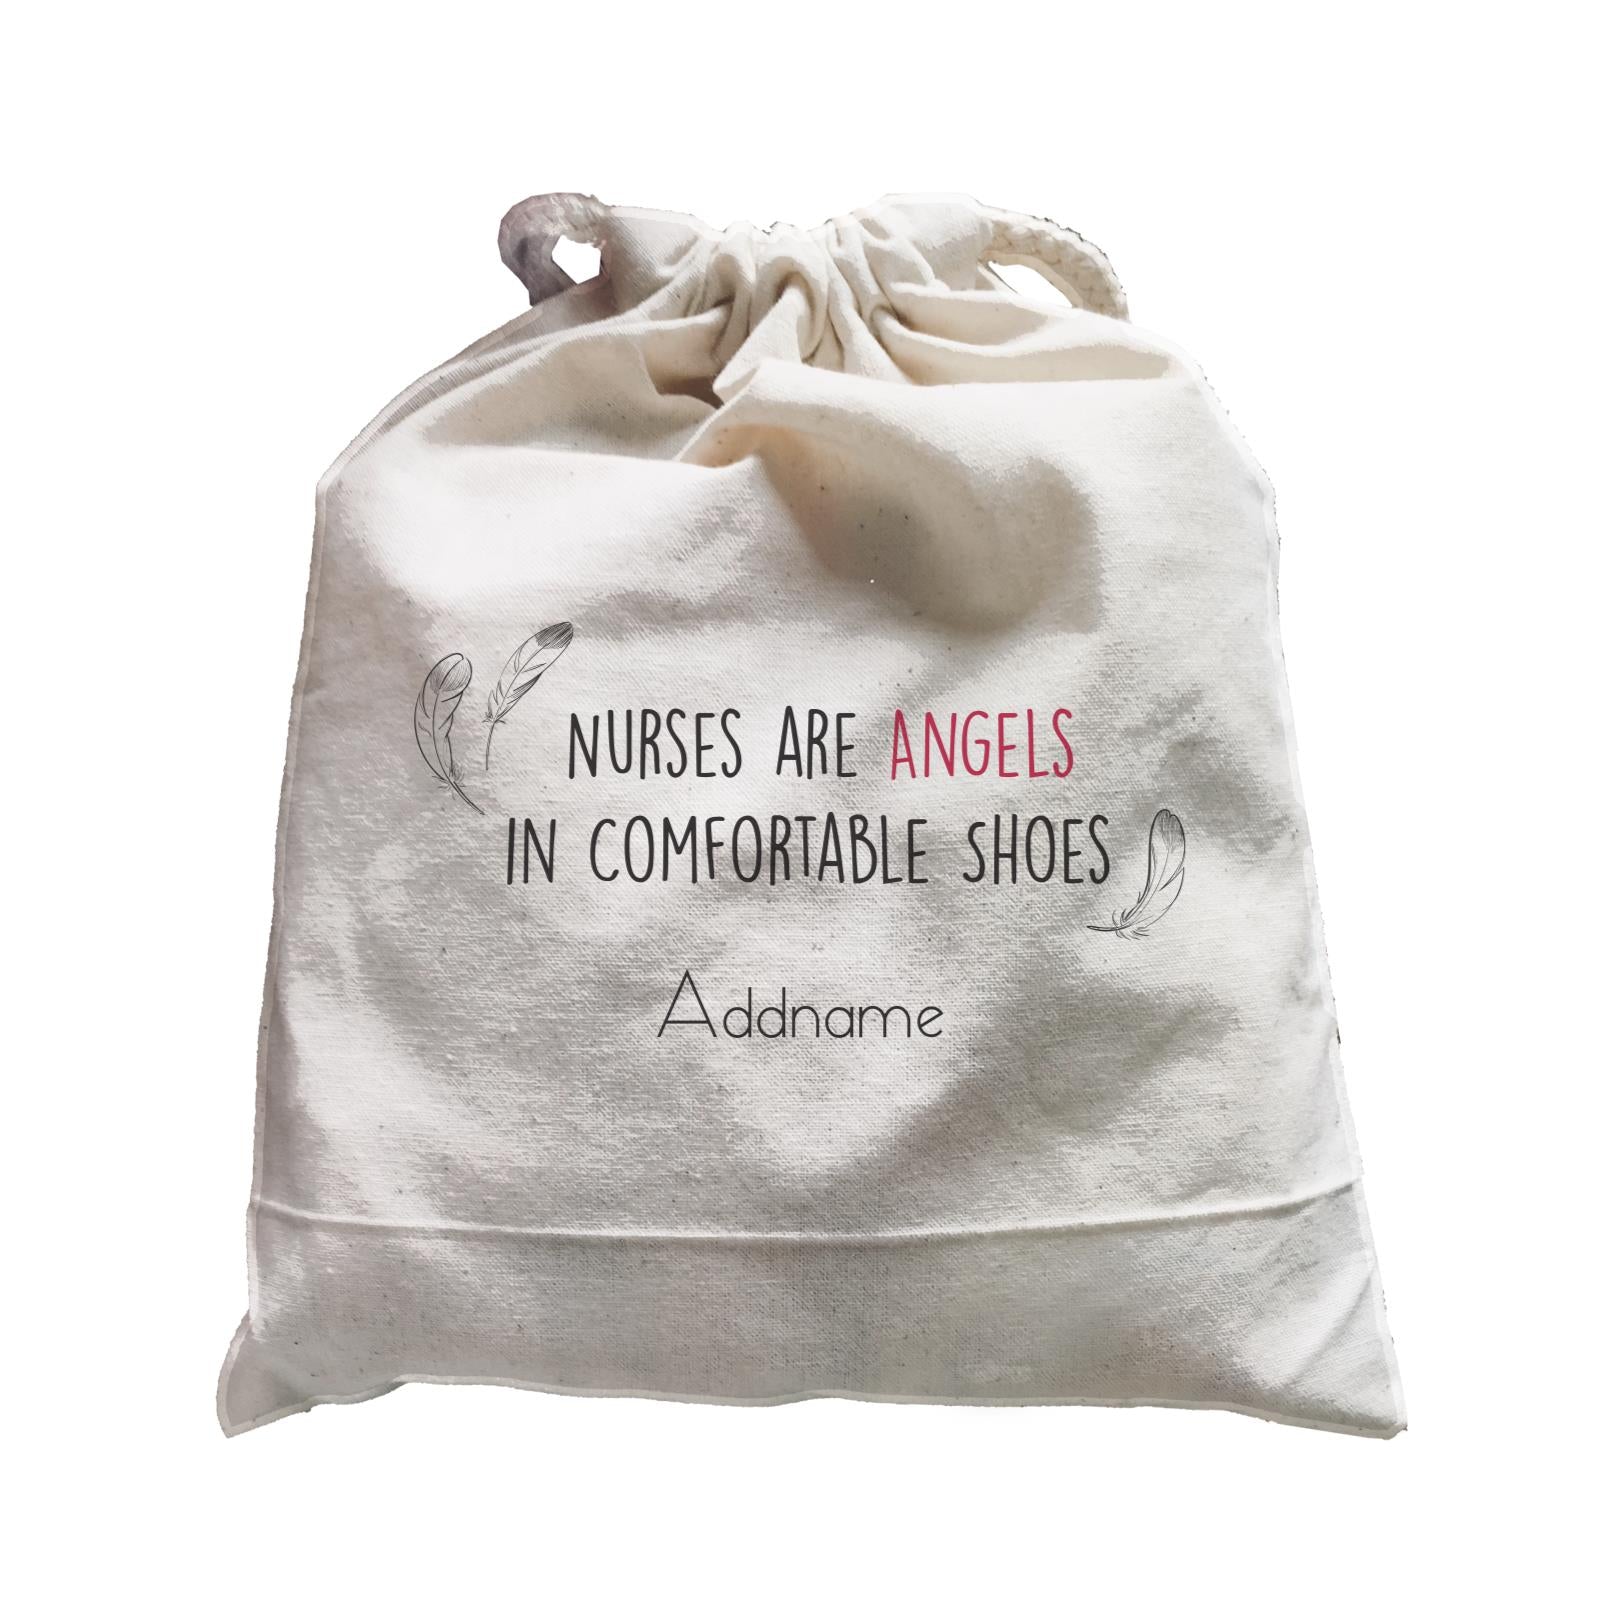 Nurses Are Angels In Comfortable Shoes Satchel